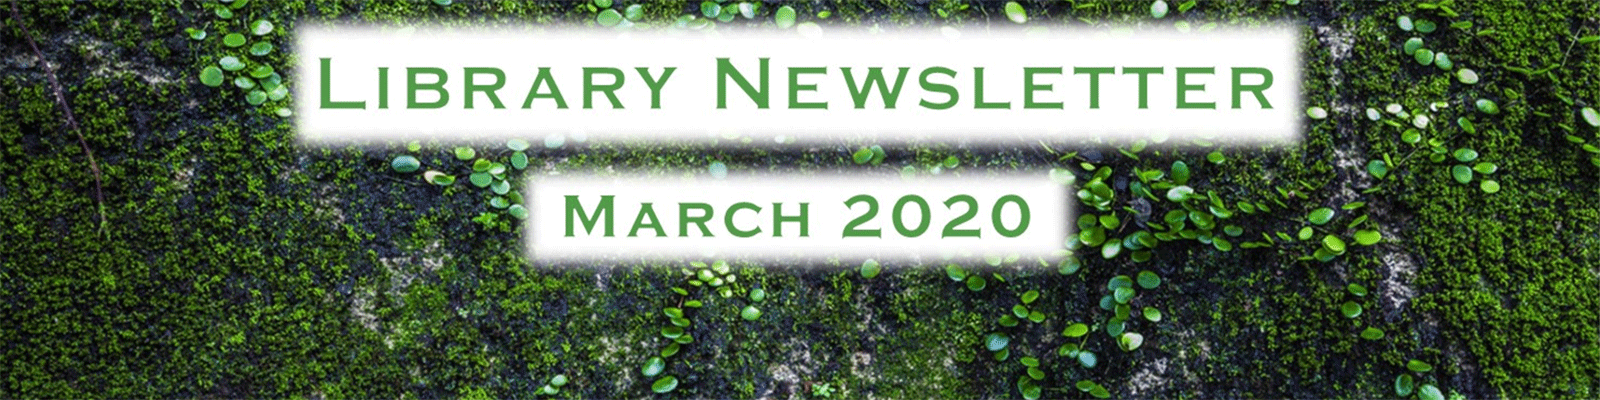 Library Newsletter March 2020